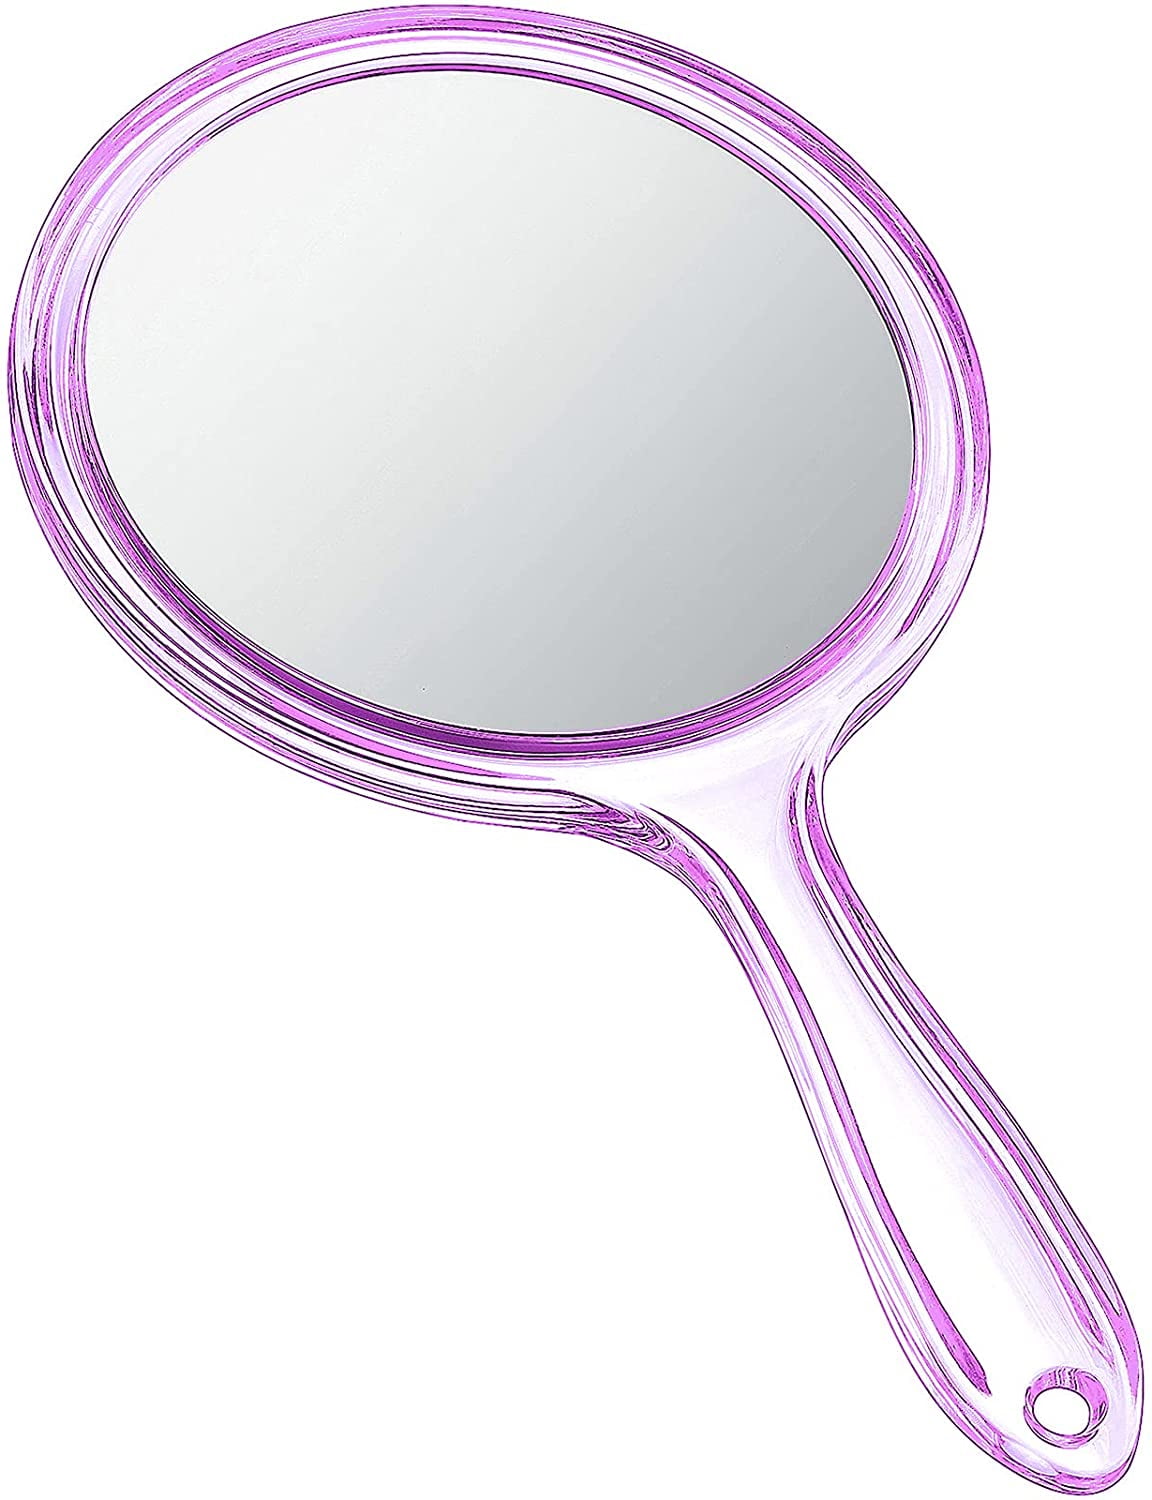 My Flexible Mirror 10x Magnification 7” Make Up Round Vanity Flexible  Mirror for Home, Bathroom use with Super Strong Suction Cups As Seen On TV